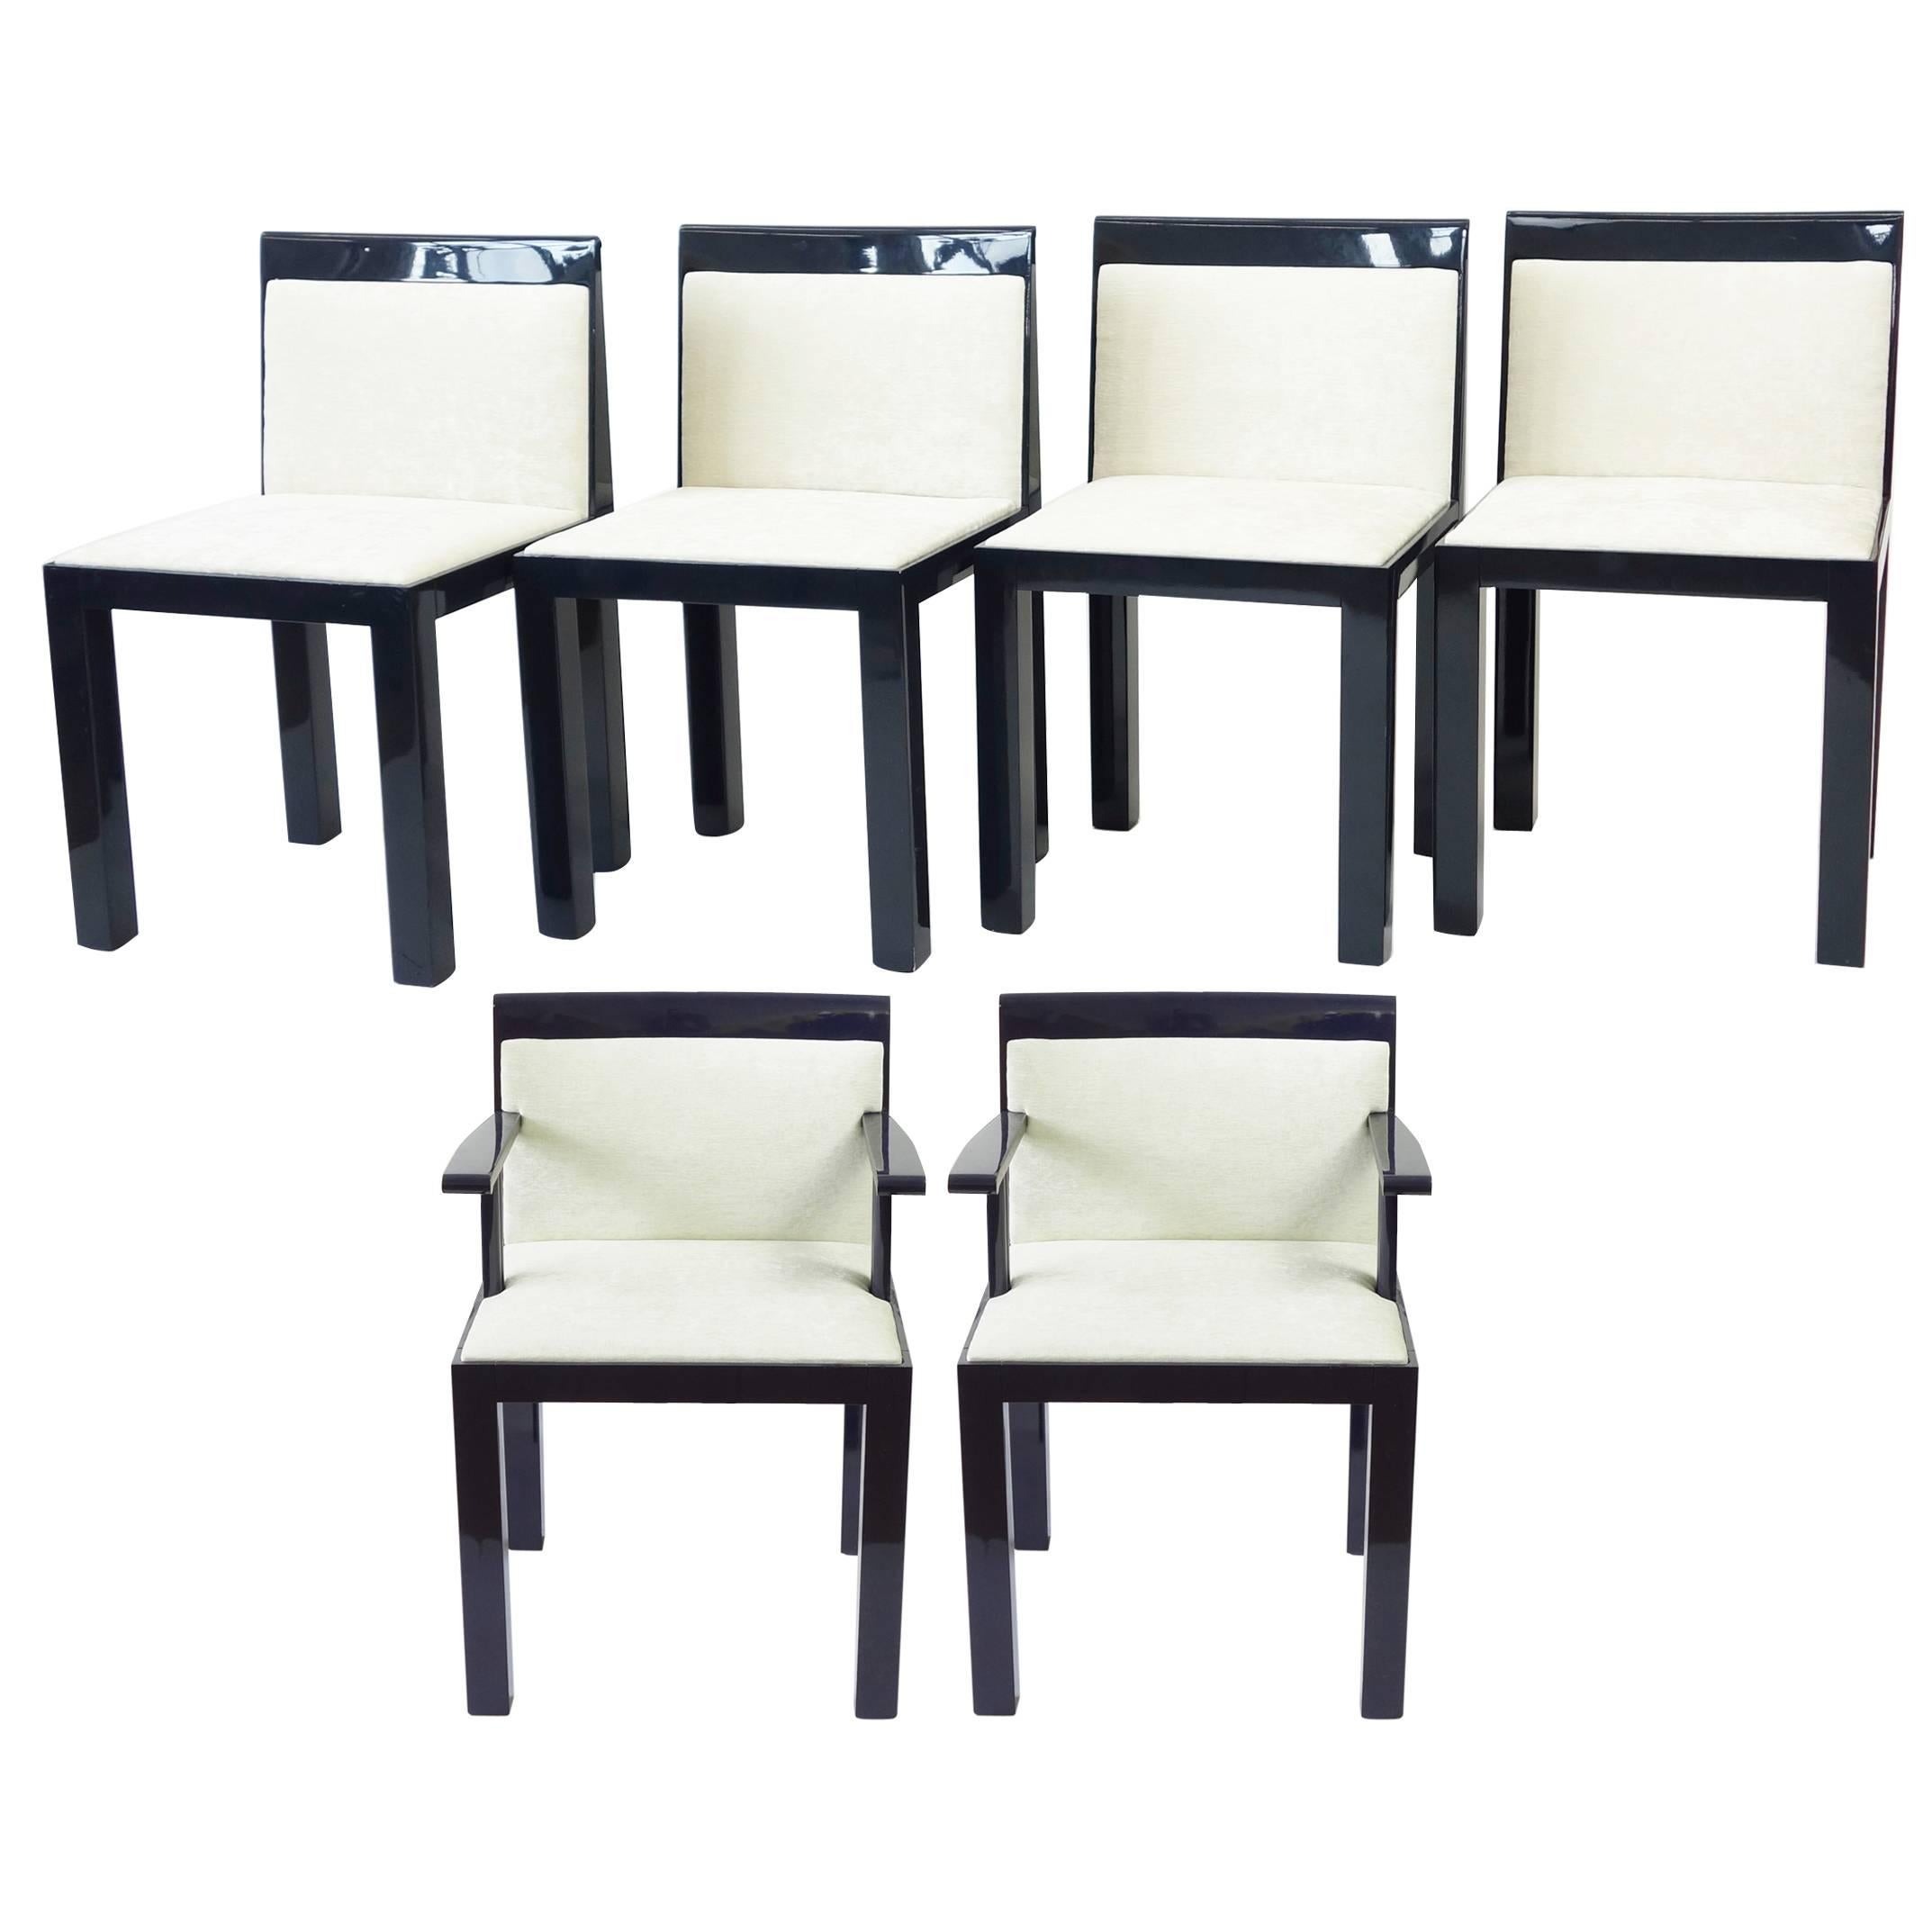 Six Teatro Chairs by Aldo Rossi and Luca Meda